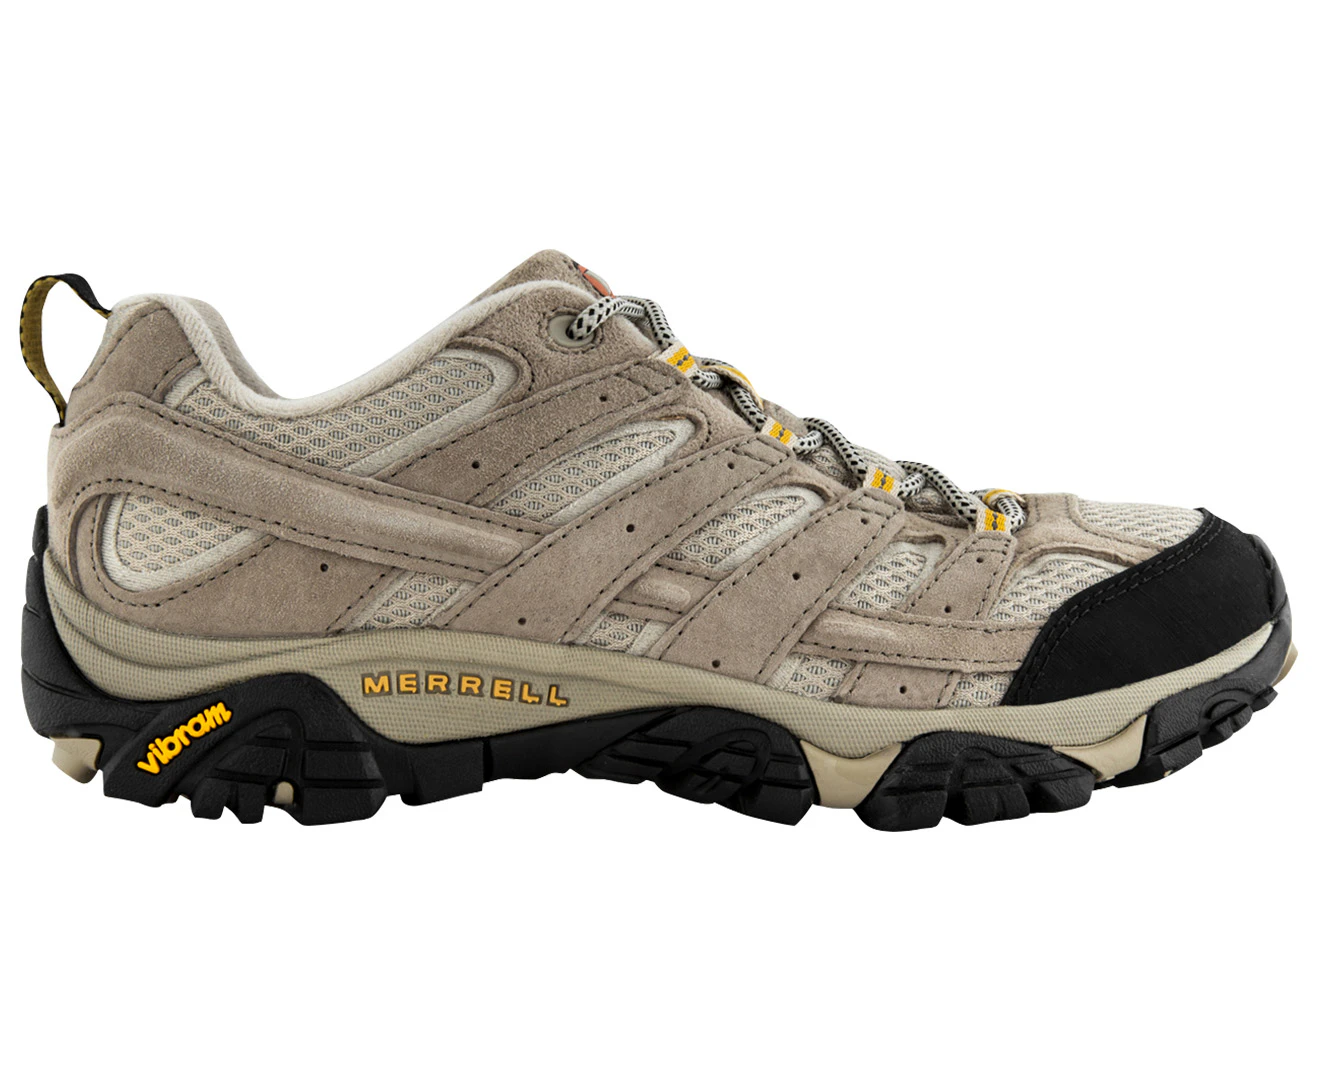 Buy Merrell Hiking Boots & More Online |